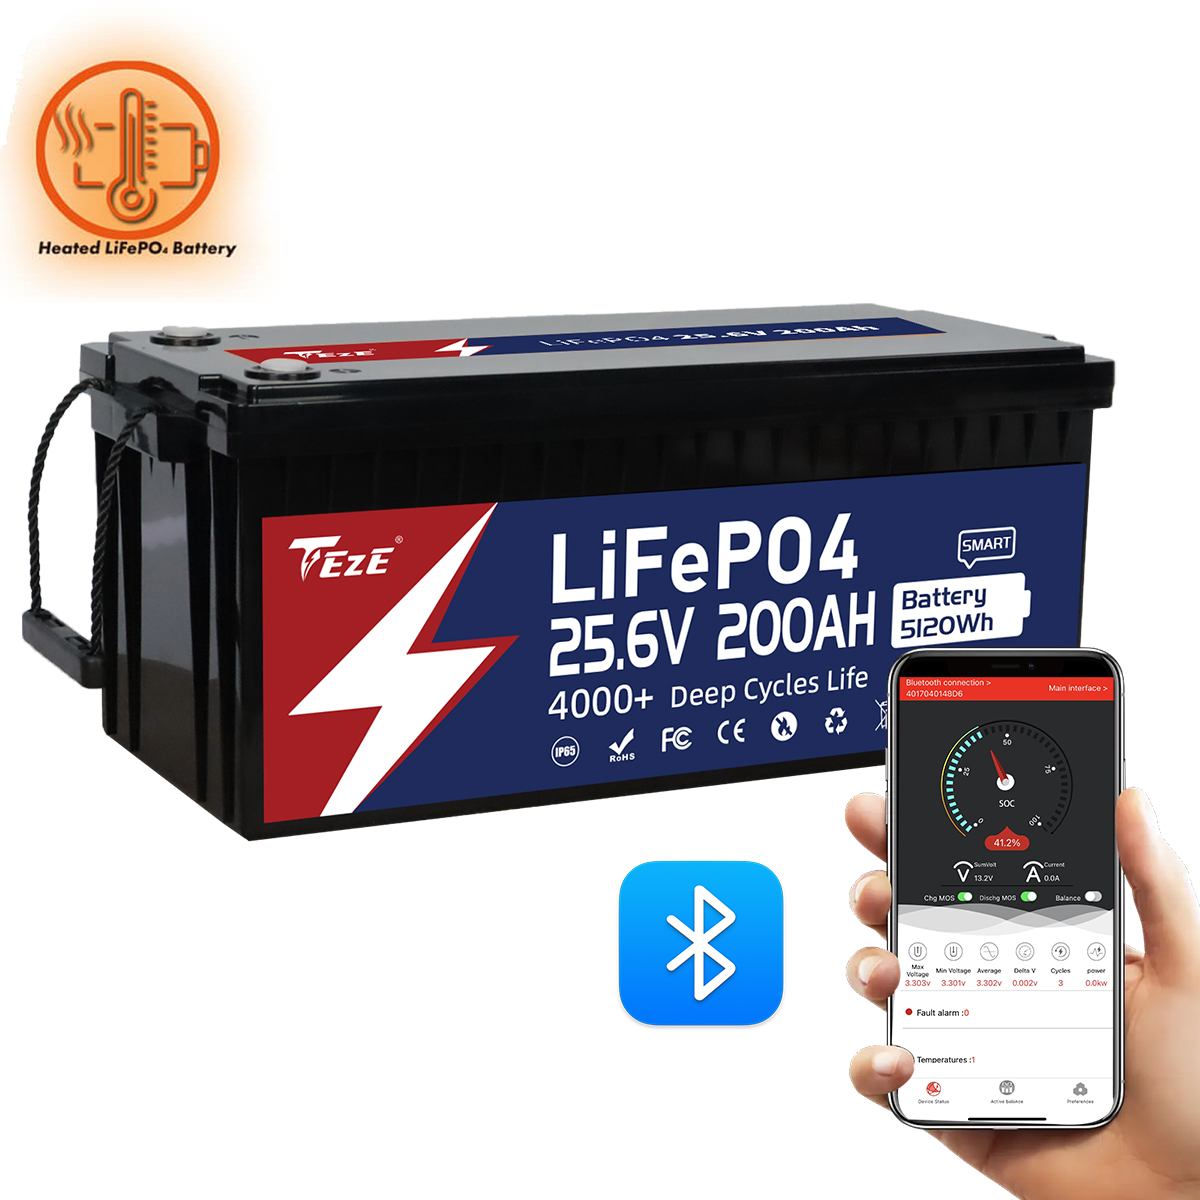 TezePower 24V 200Ah LiFePO4 Battery with Bluetooth, RS485/RS232/CAN Communication Ports, Self-heating and Active Balancer, Built-in 200A Daly BMS, (Bluetooth Built-in Version)-TezePower